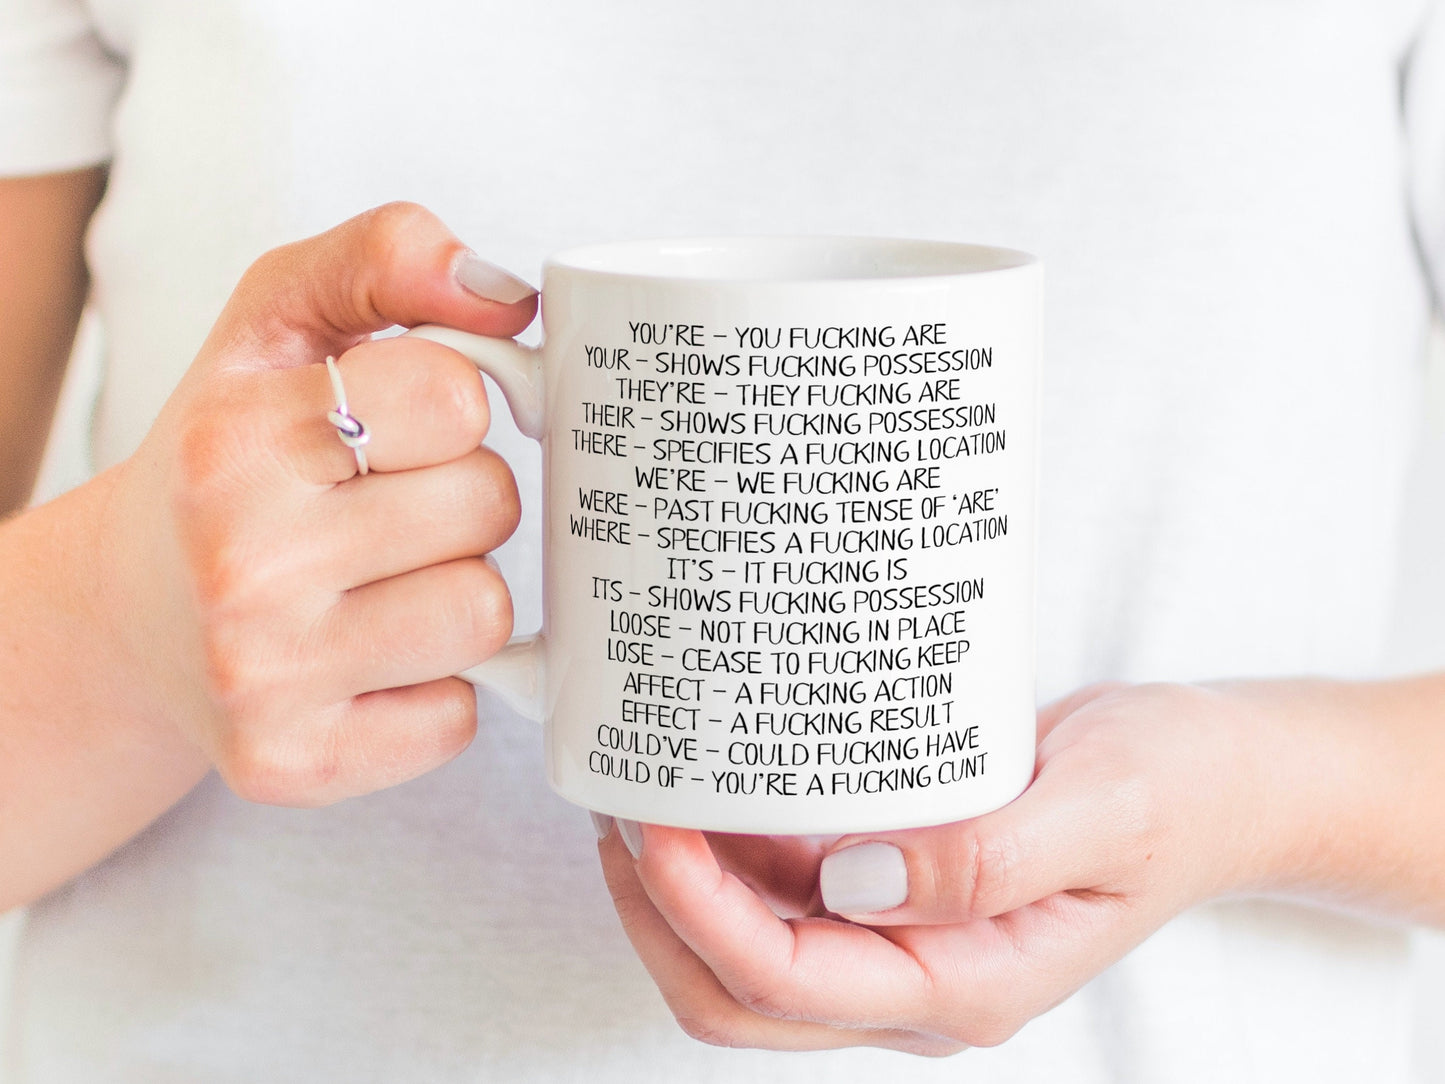 A white ceramic mug featuring funny spelling corrections such as You've - You fucking are and Your- shows fucking progression. Printed in black ink.